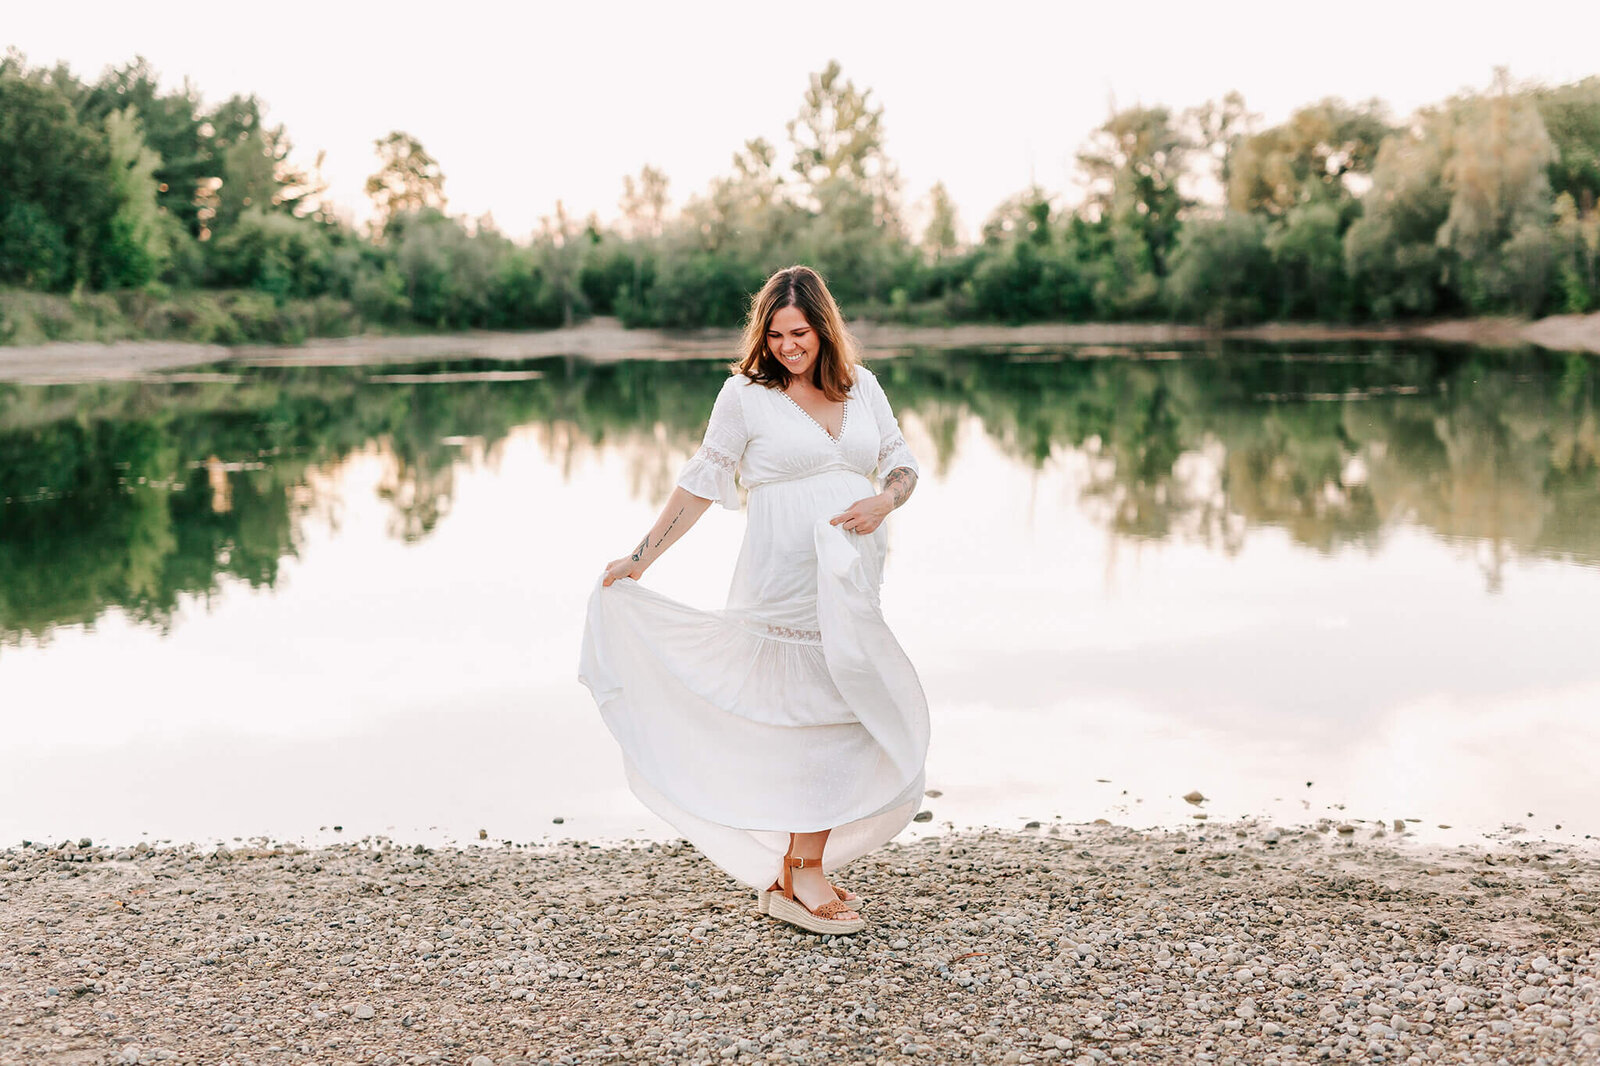 Pregnant woman  in a white Baltic Born dress, dances in front of the water during her photoshoot